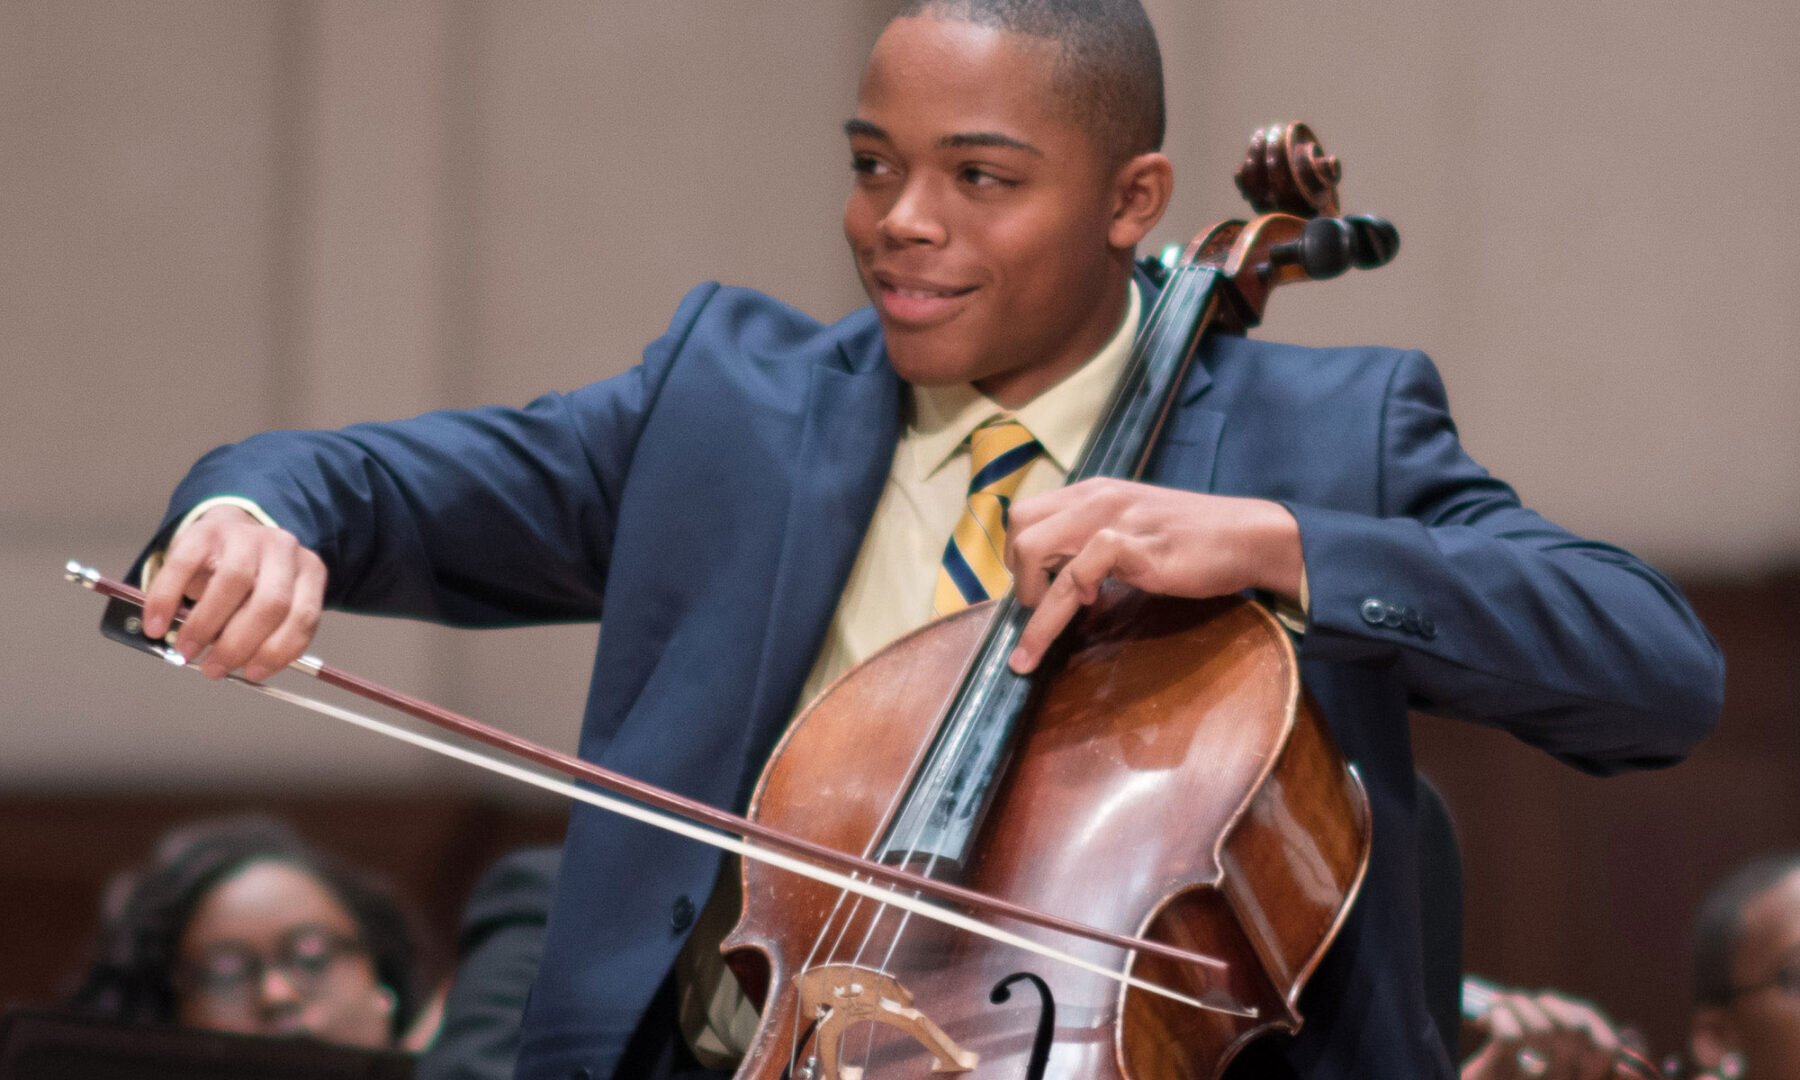 PODCAST NPRs From the Top with Fred Fox School of Music Sophomore Levi Powe